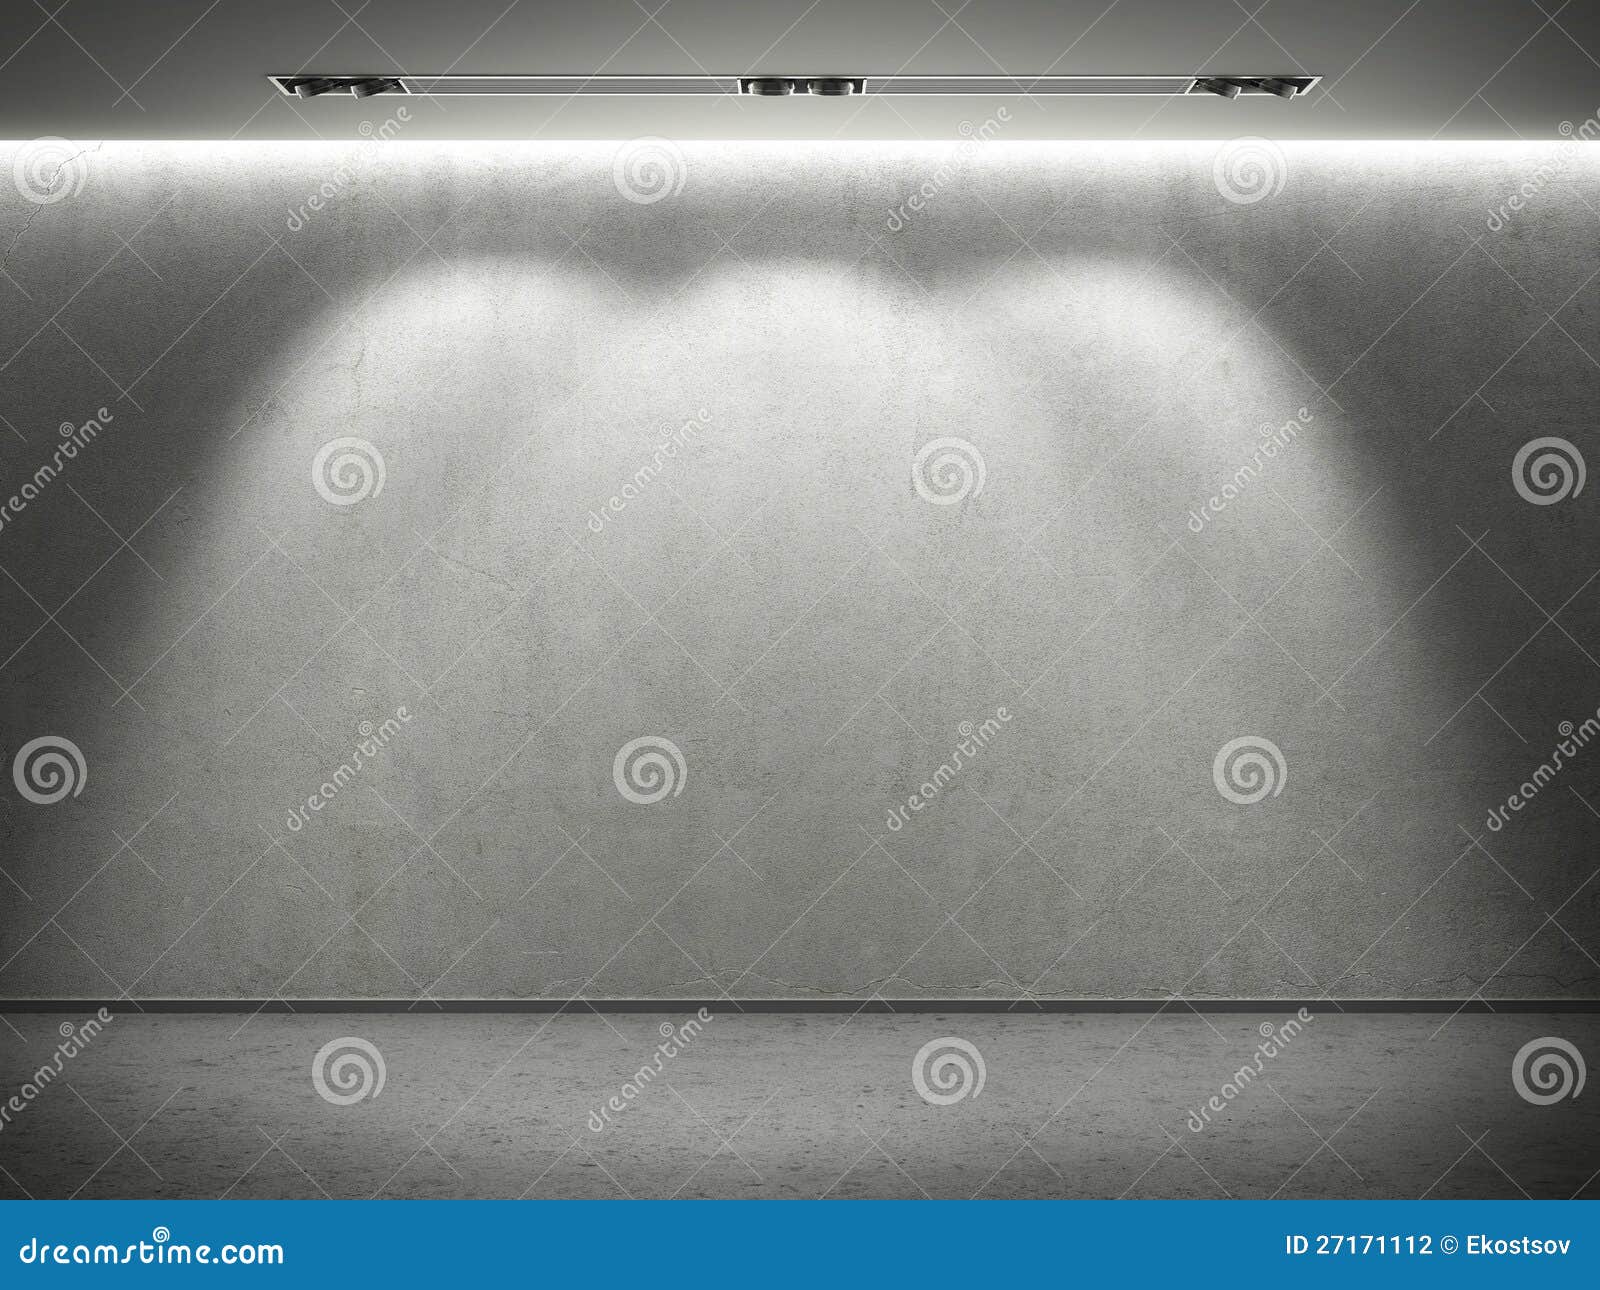 Empty Concrete Wall with 3 Spot Lights Stock Illustration ...